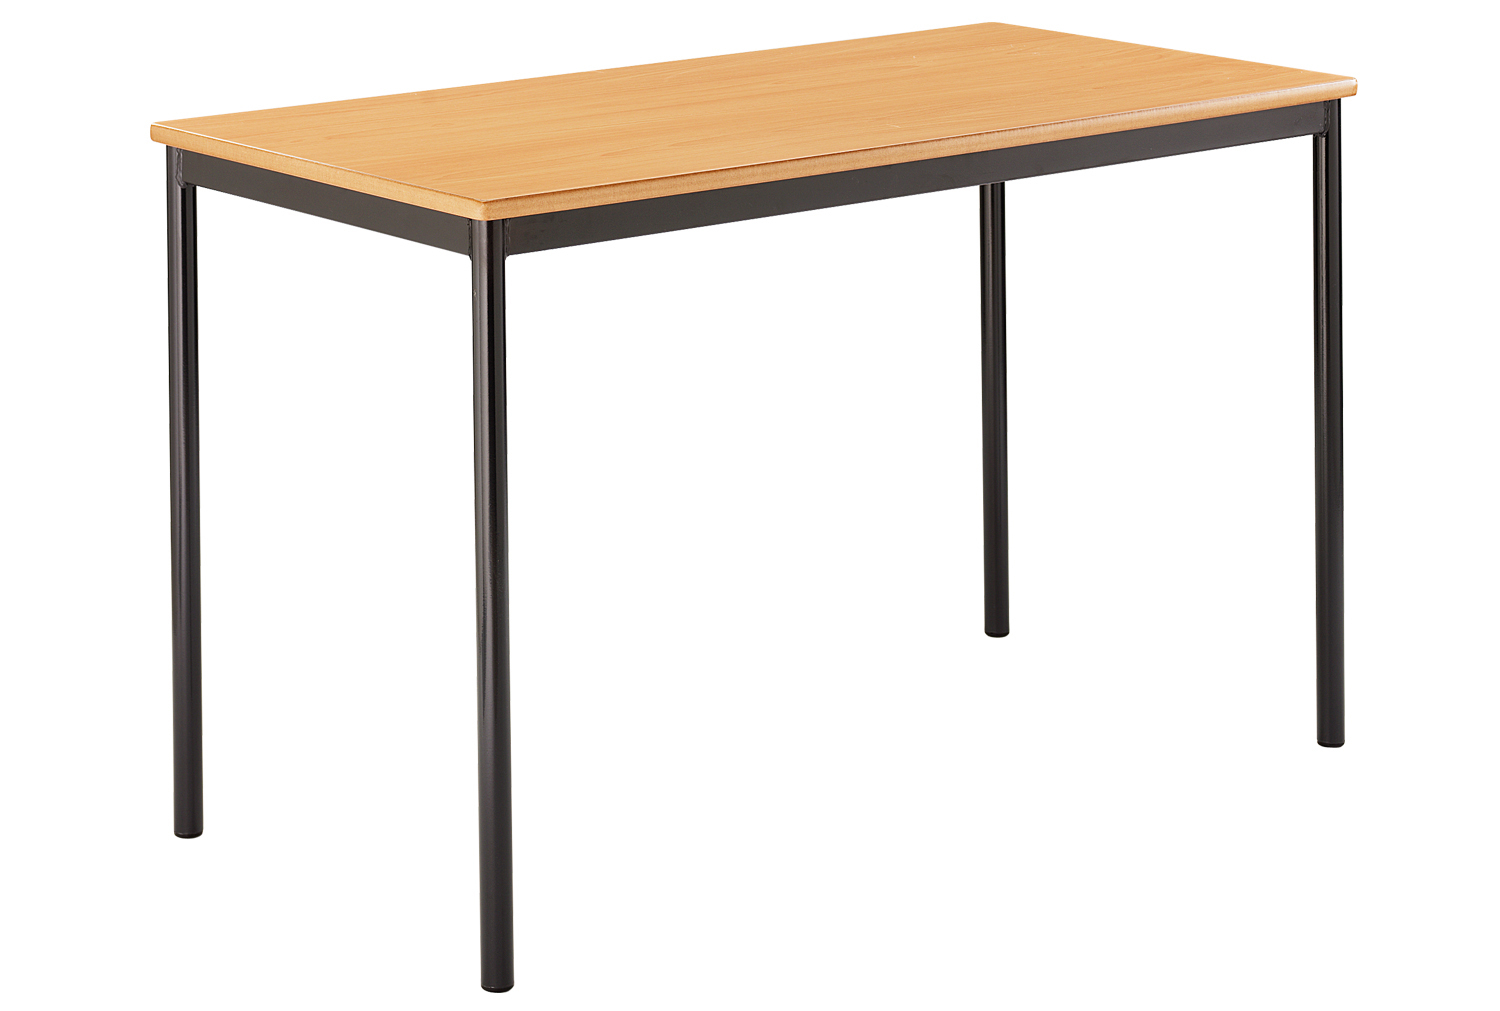 Qty 4 - Rectangular Fully Welded Classroom Tables 11-14 Years, 120wx60dx71h (cm), Light Grey Frame,Maple Top,PU Grey Edge